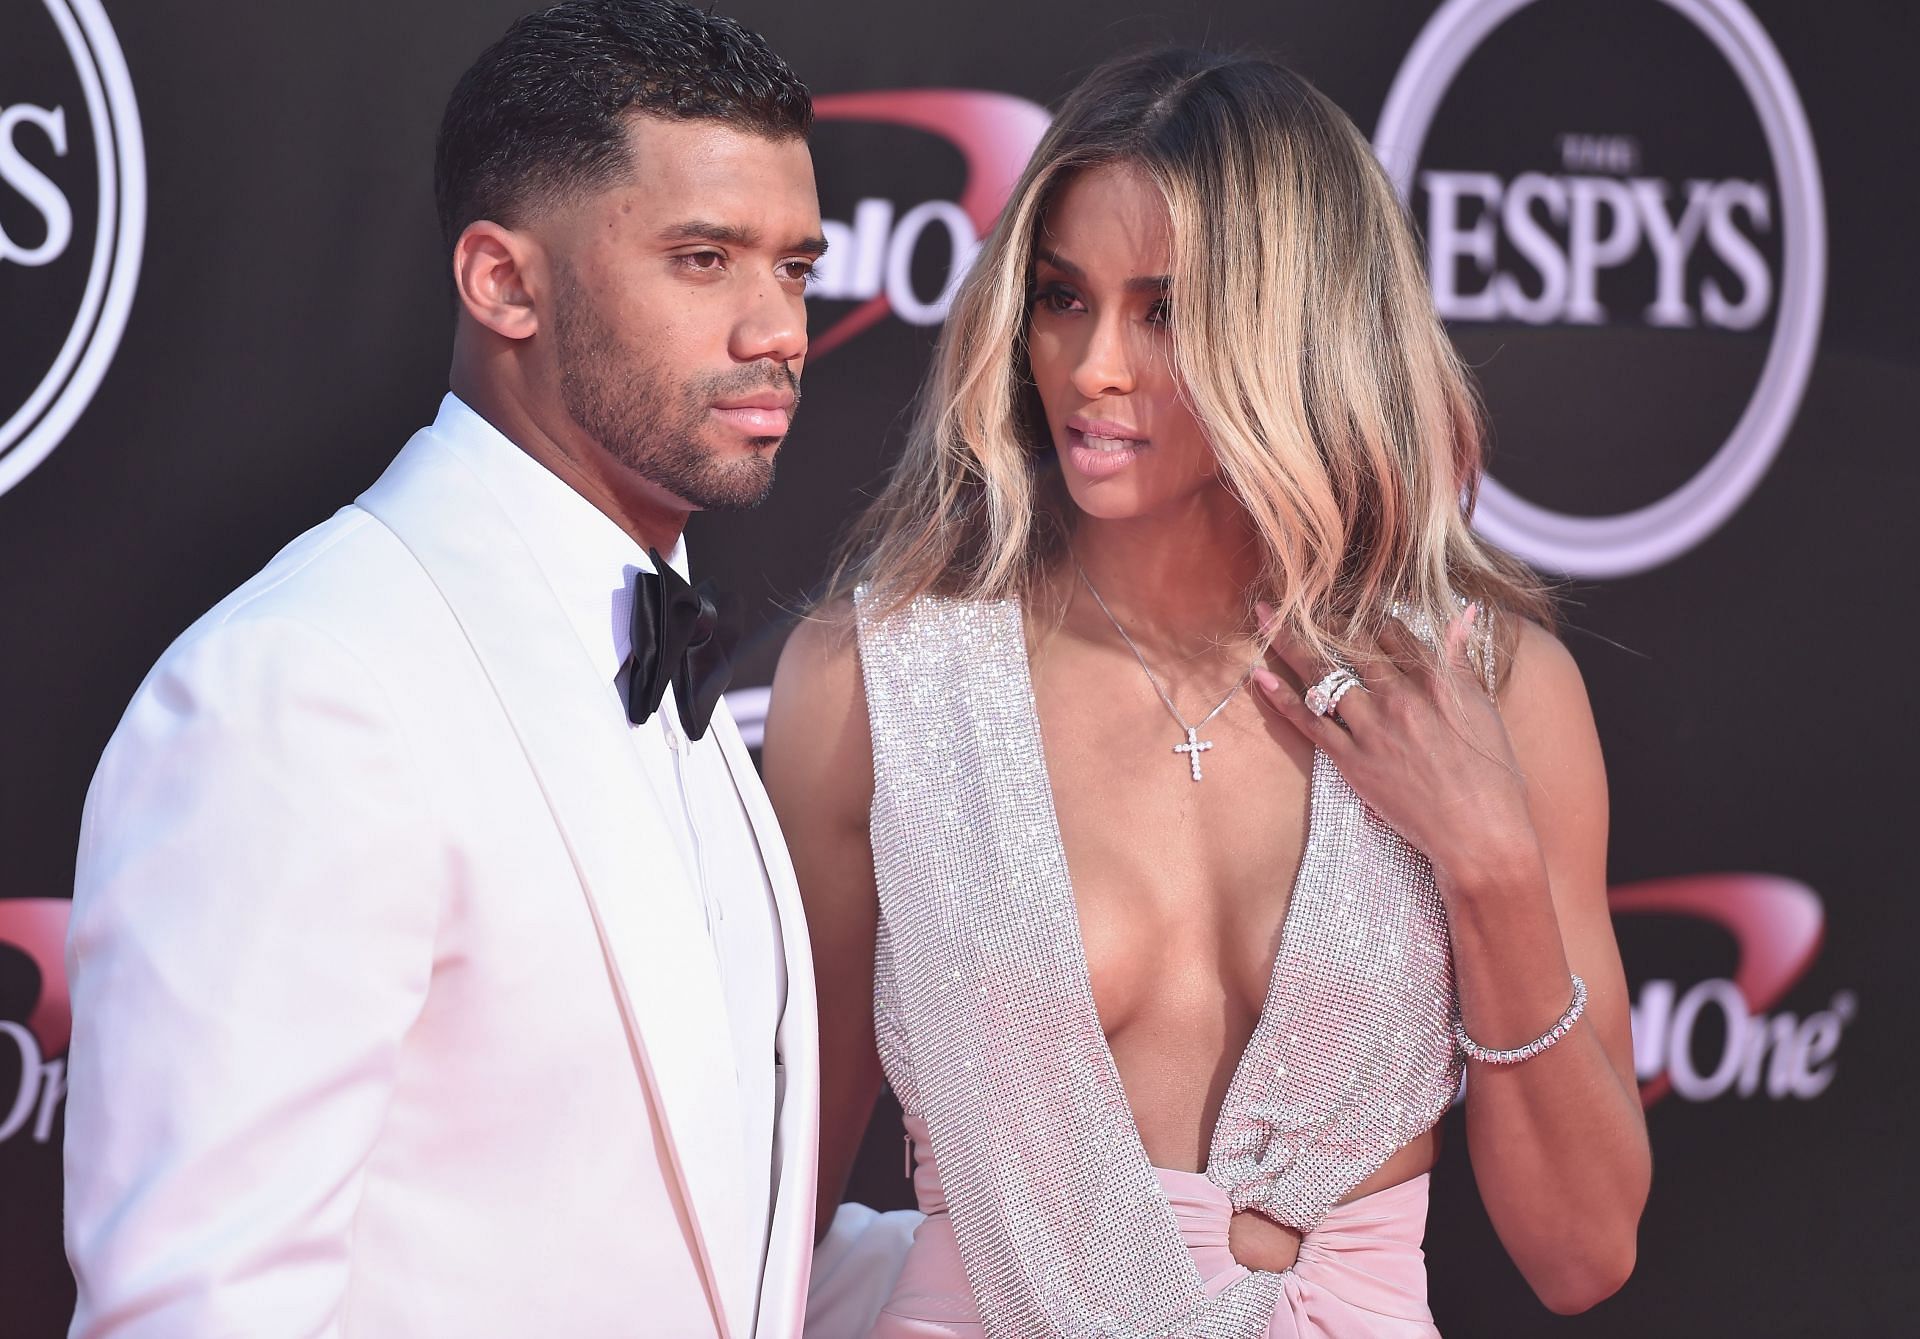 The power couple at the 2016 ESPYS